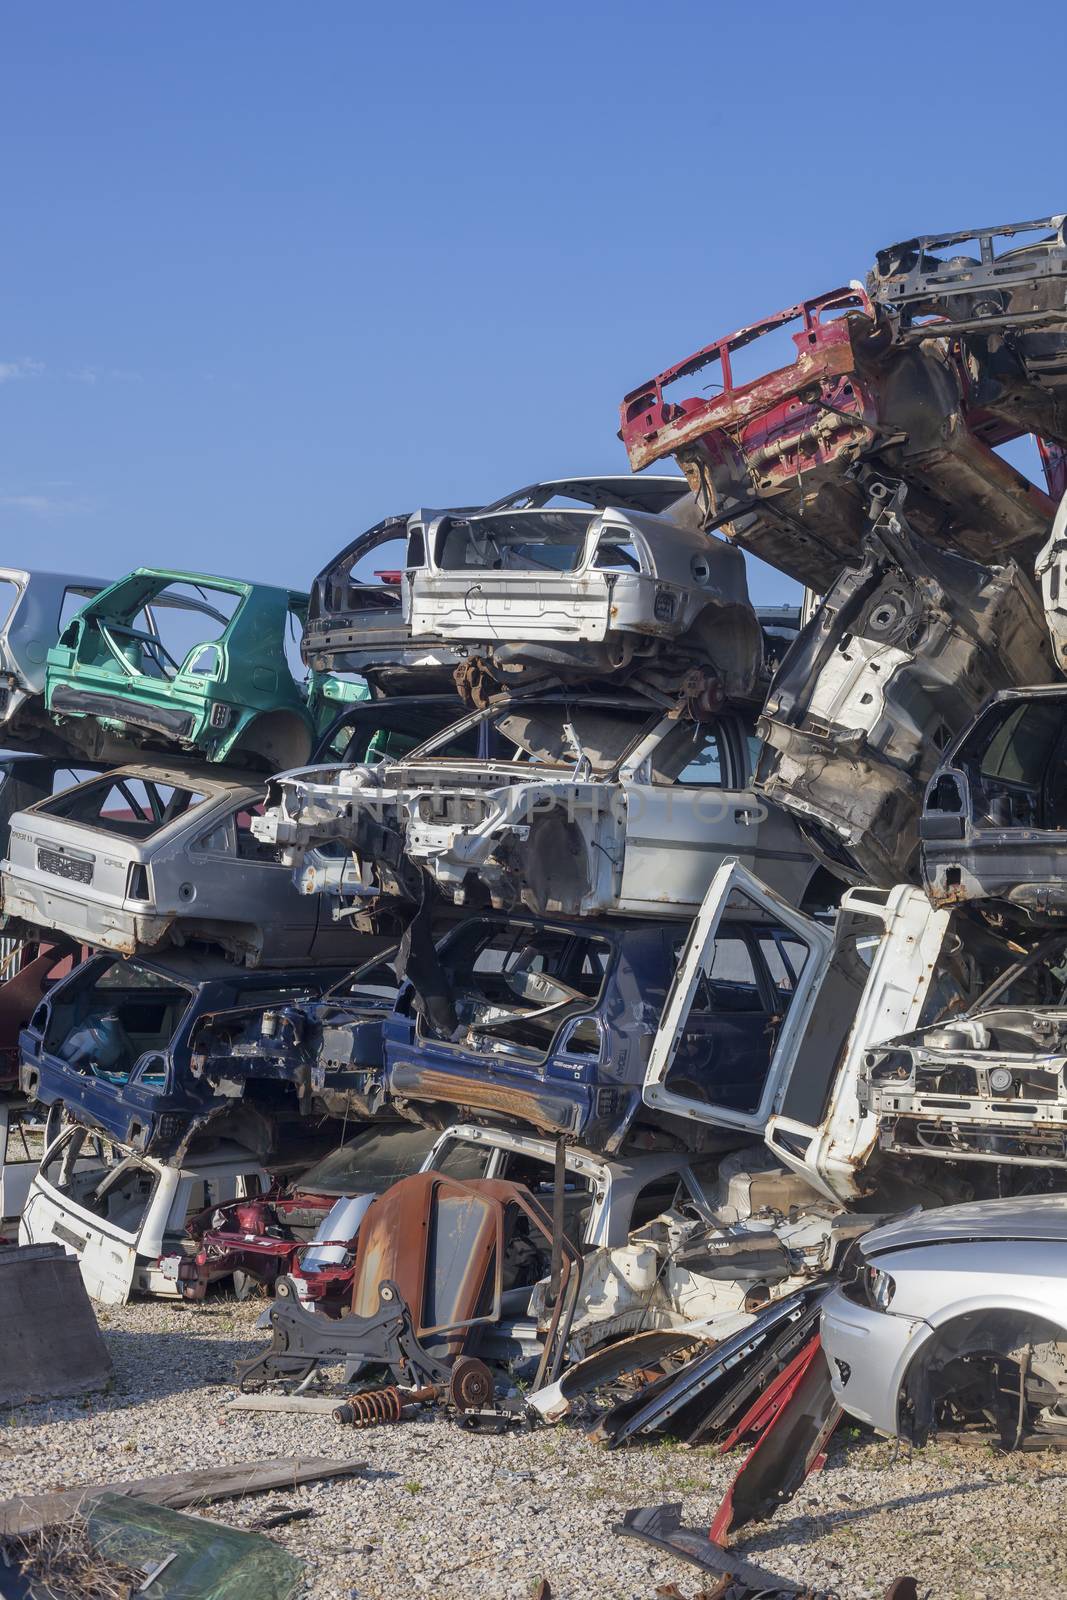 Damaged old cars are waiting for recycling by adamr